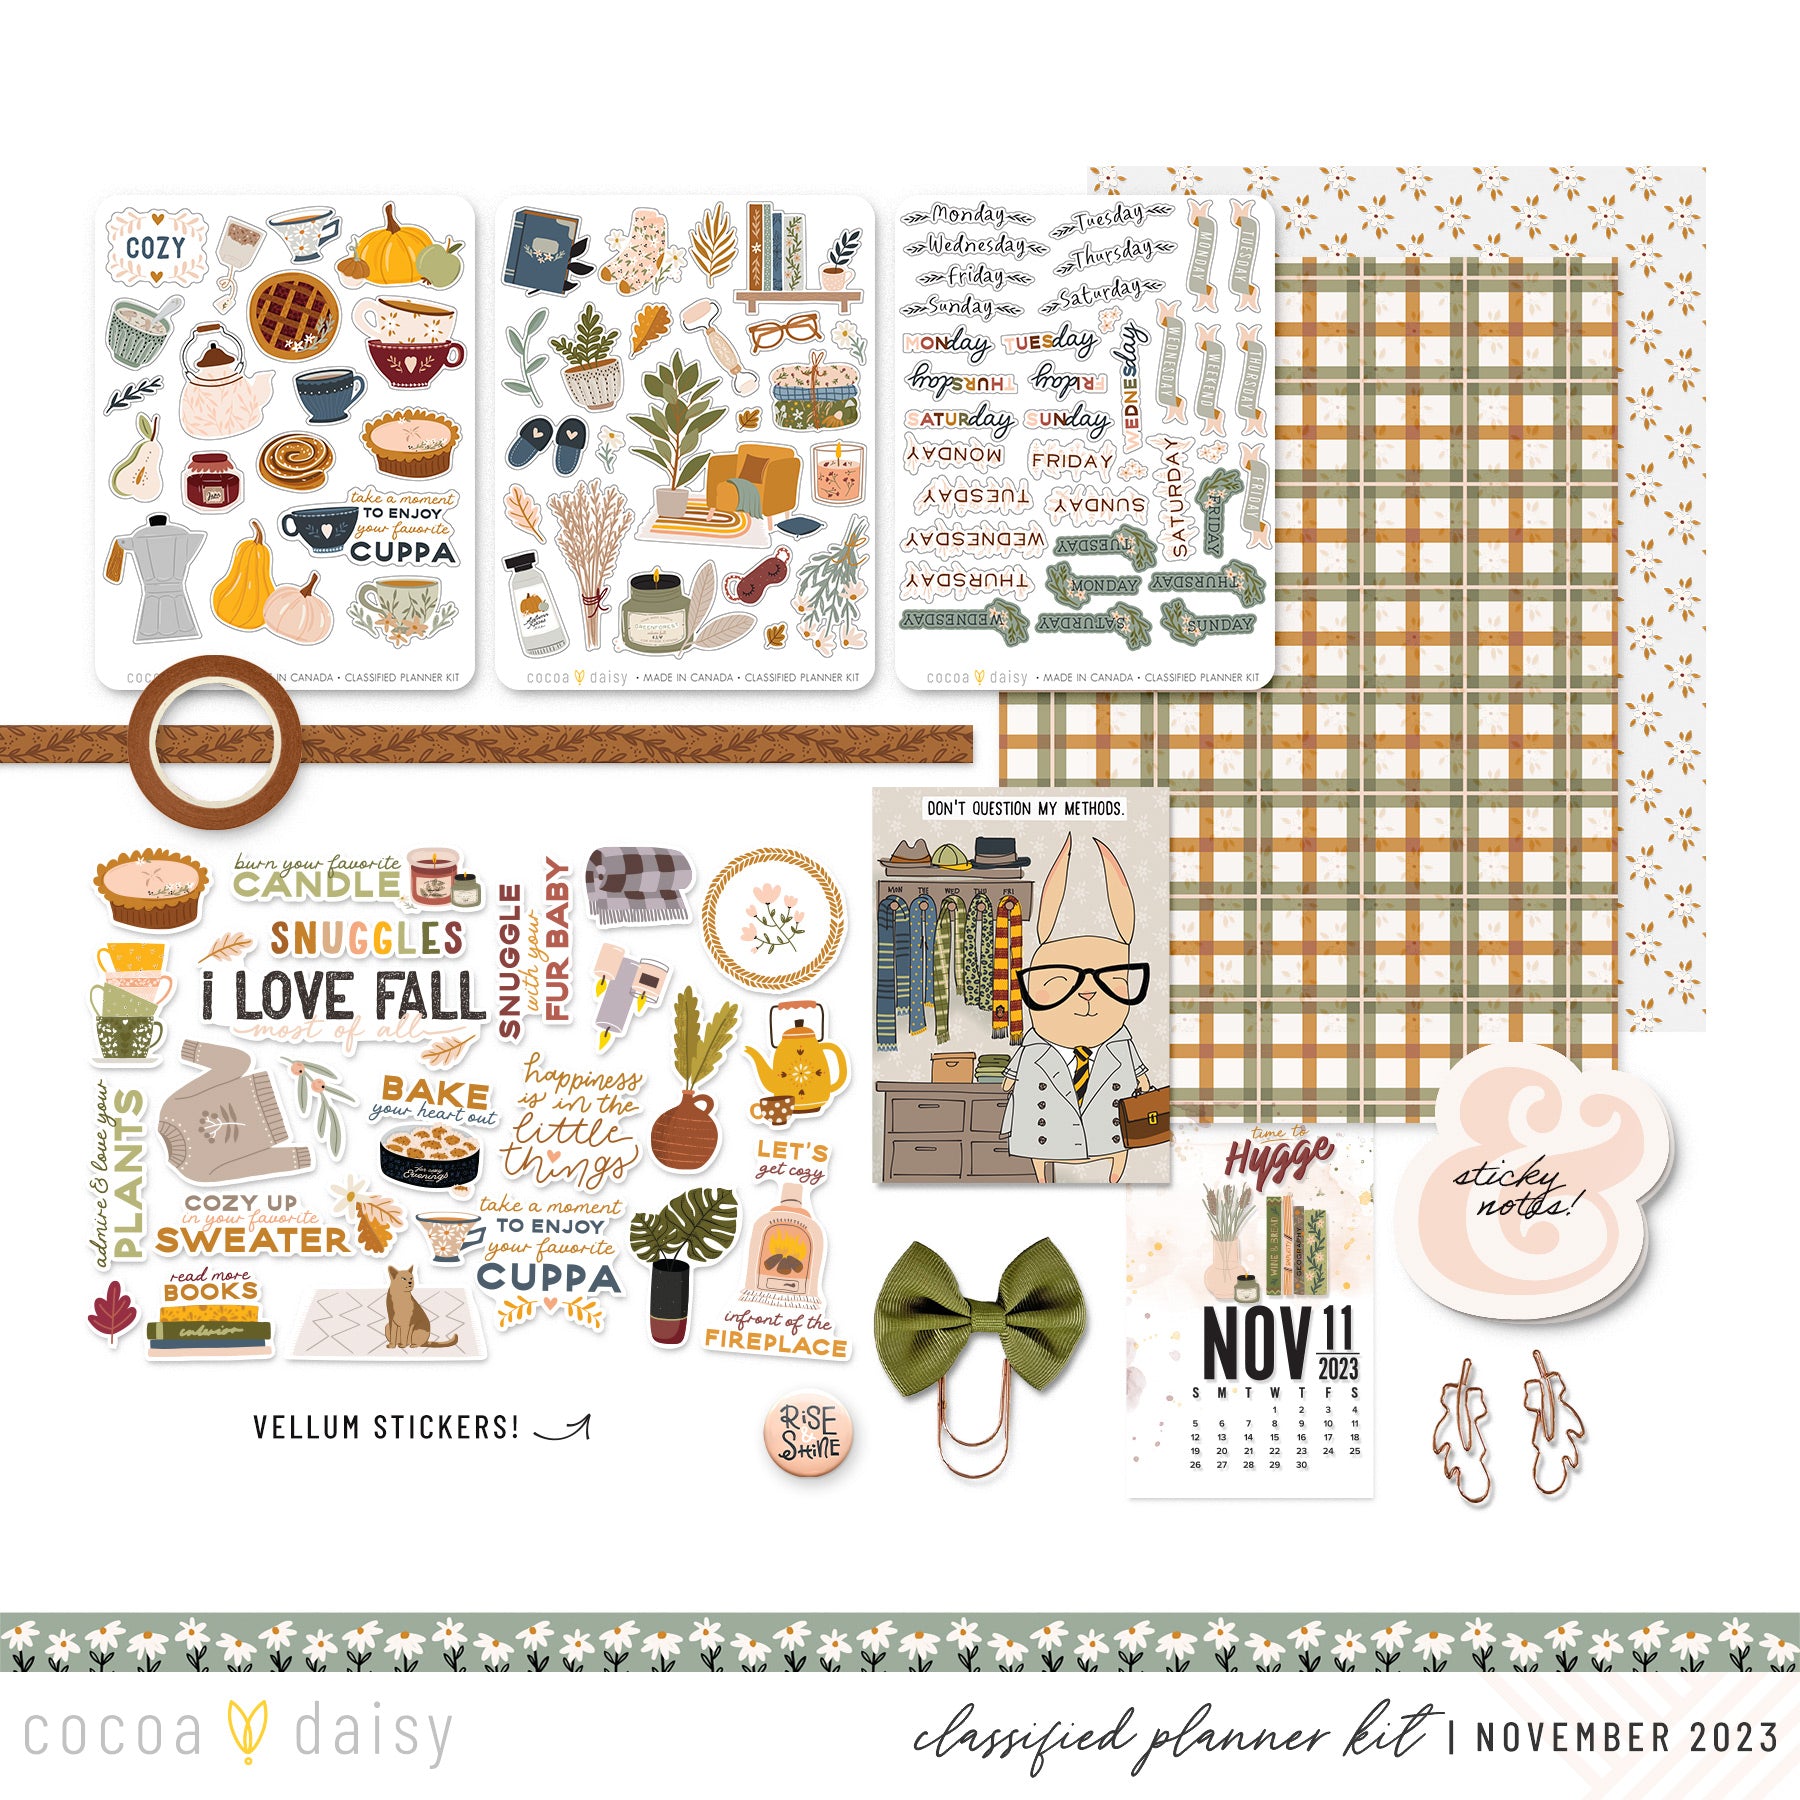 Home Sweet Home Stationery (Classified Planner) Kit November 2023